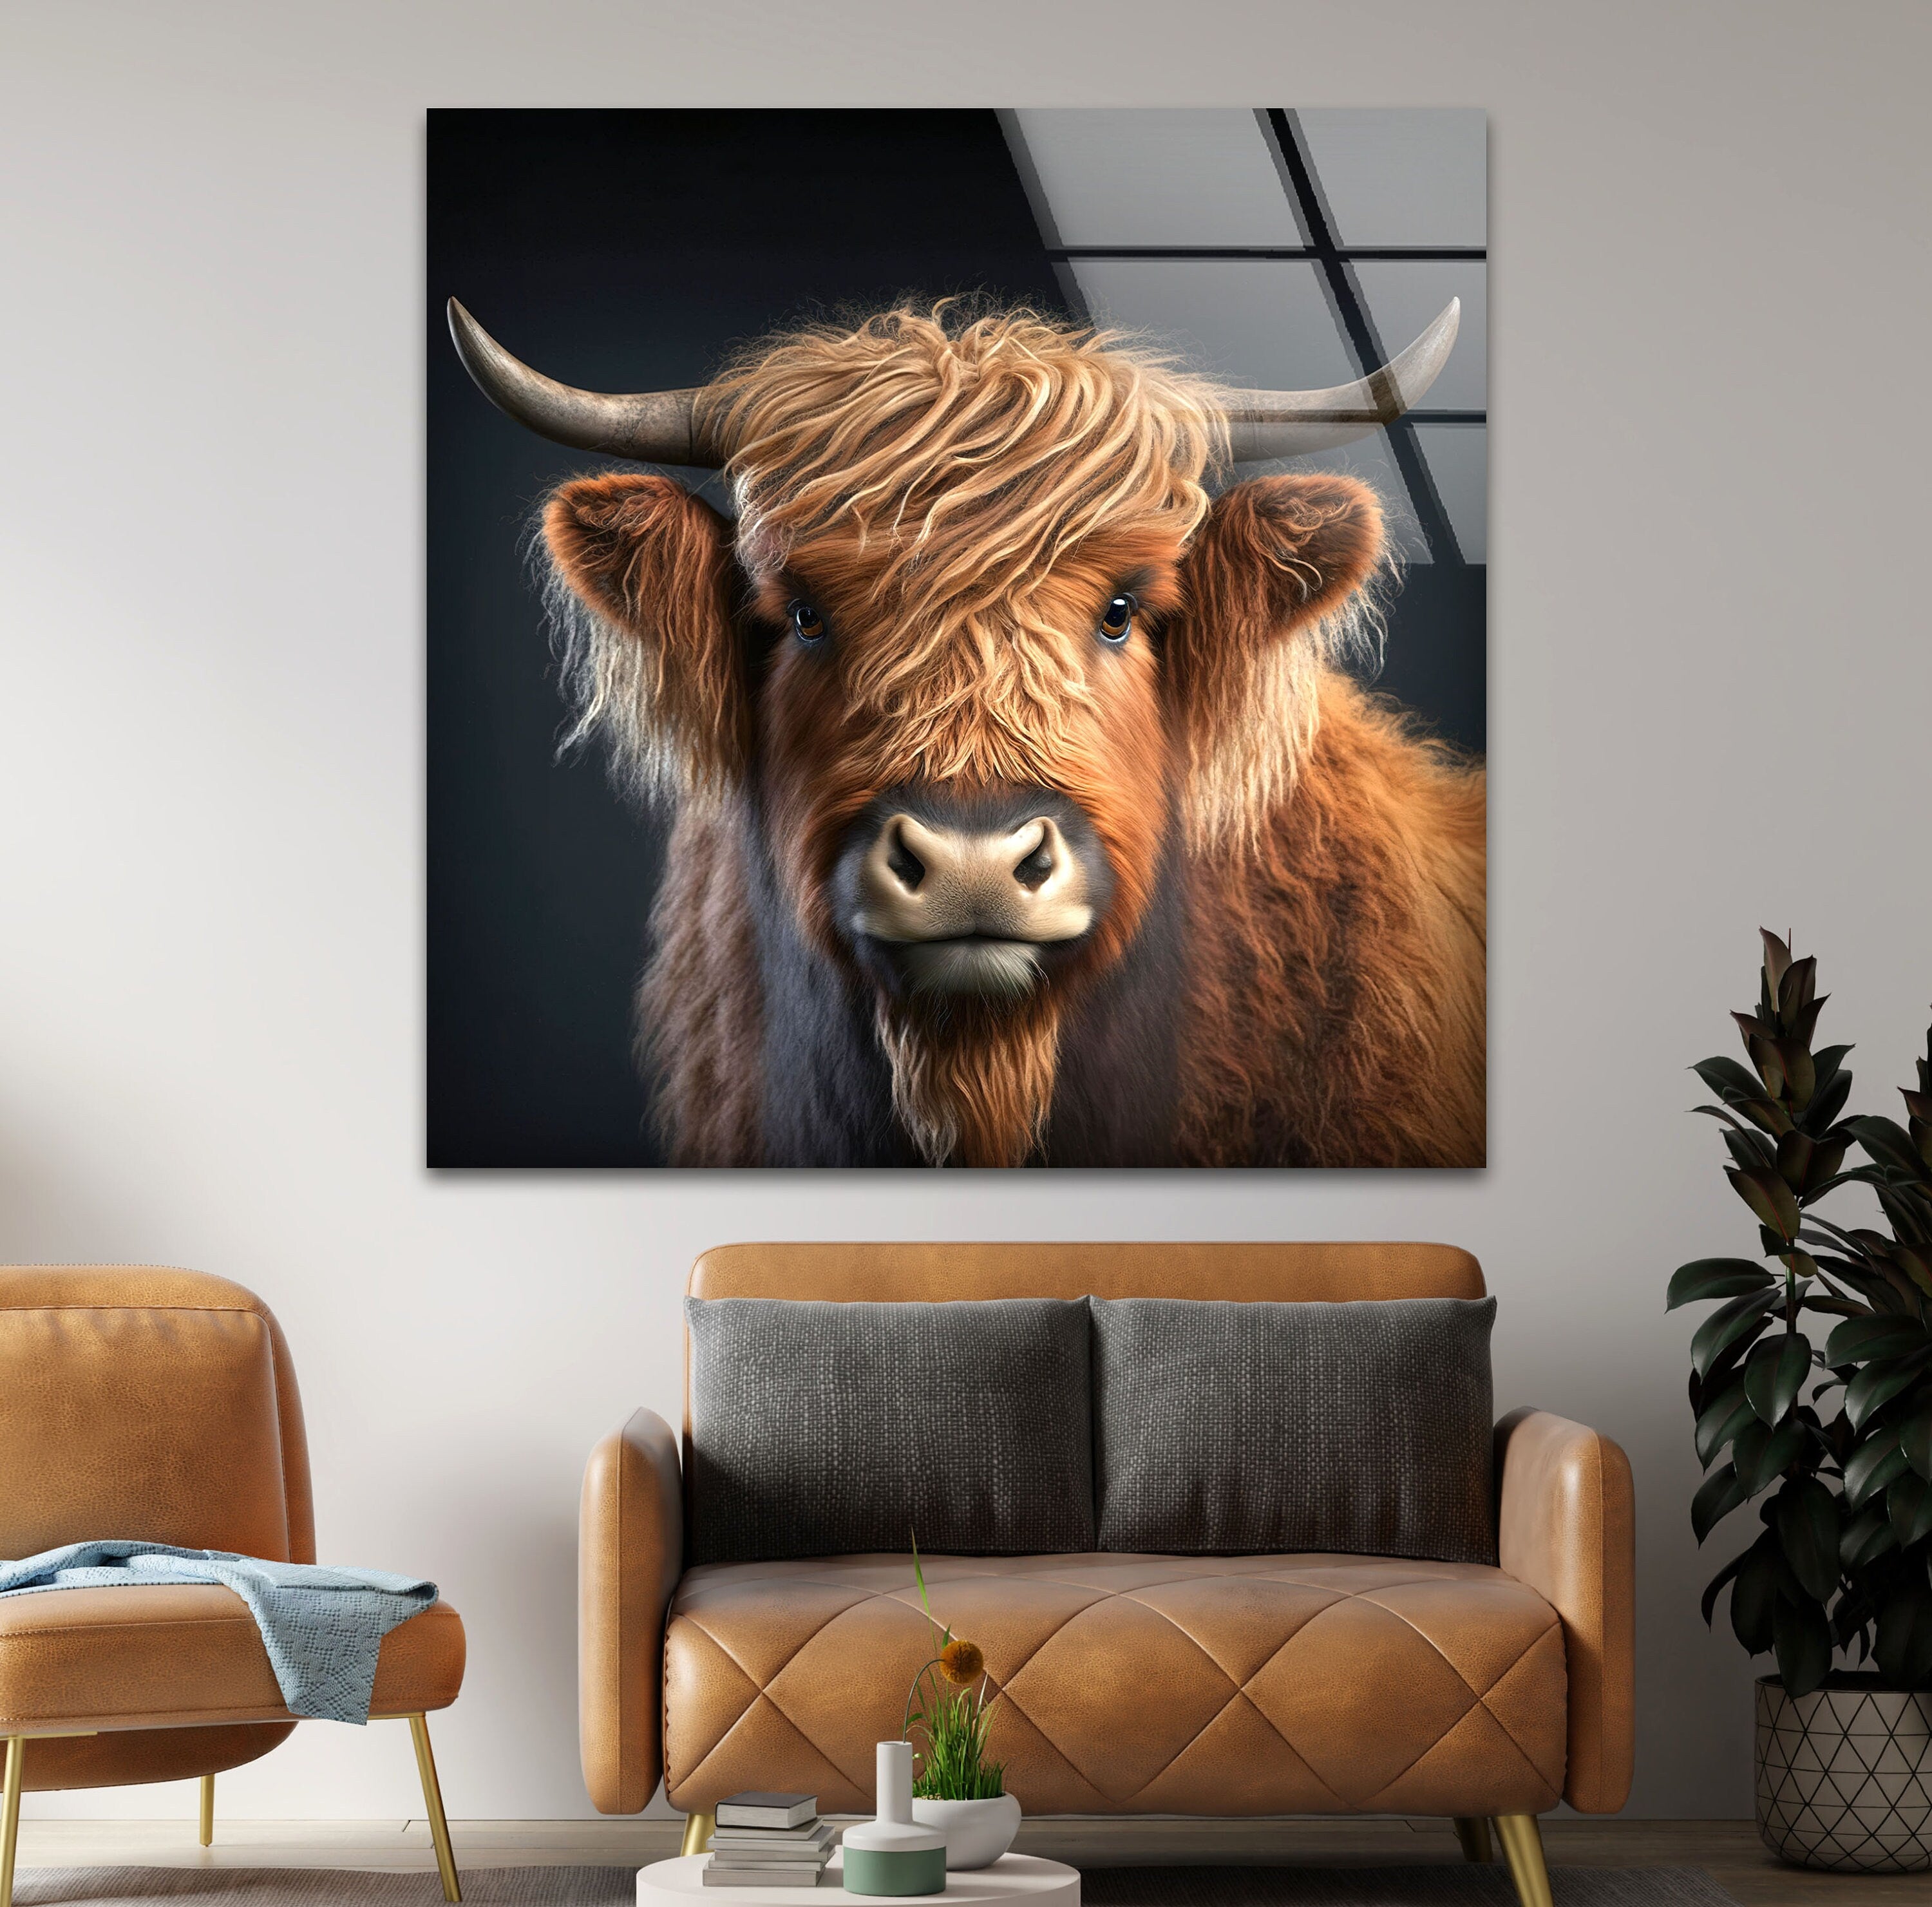 a cow with long hair standing in a living room